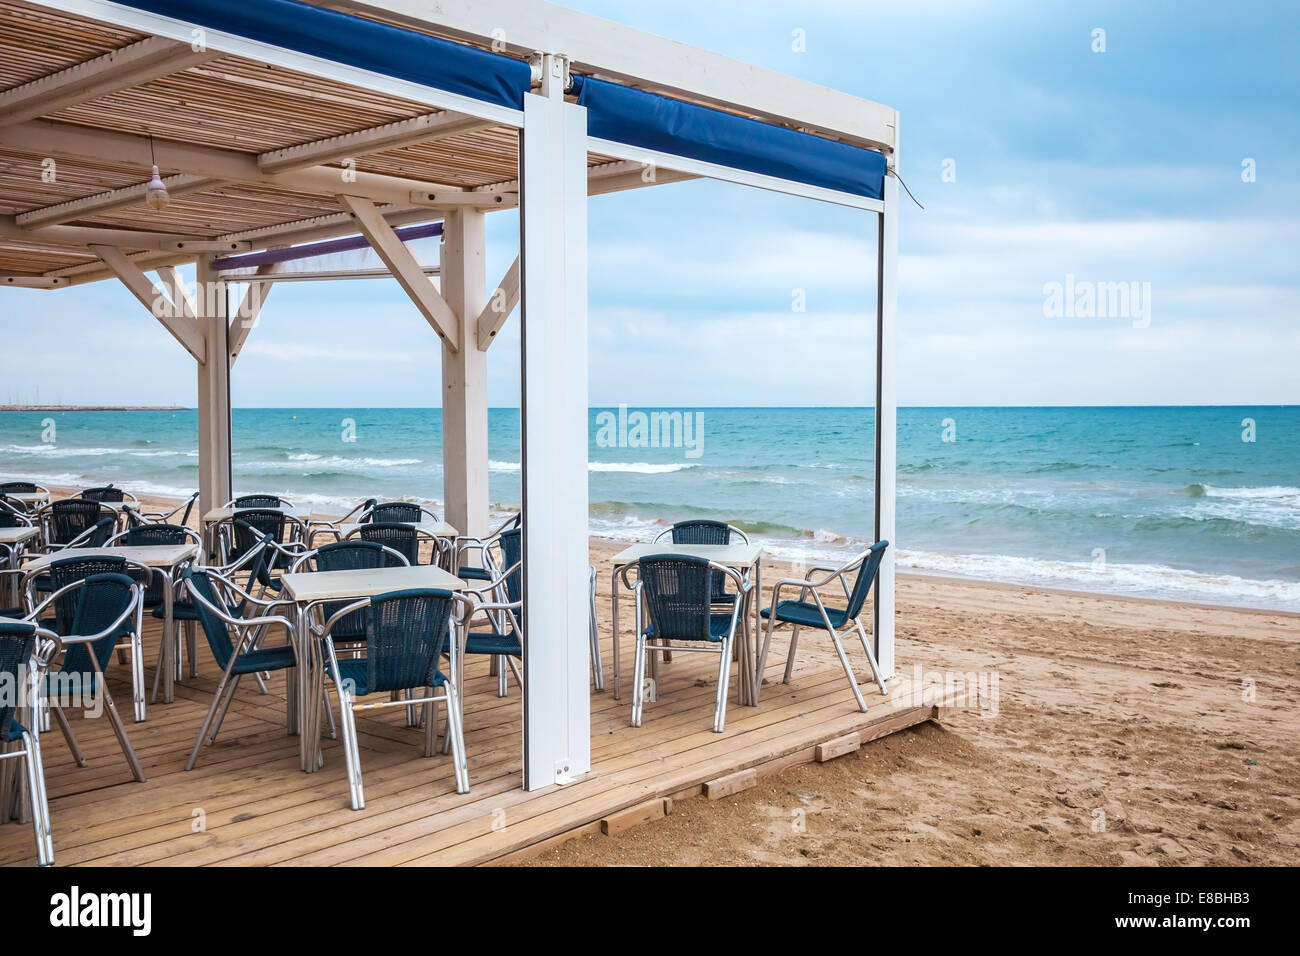 Sea side bar interior with wooden floor and metal armchairs on the sandy beach Stock Photo